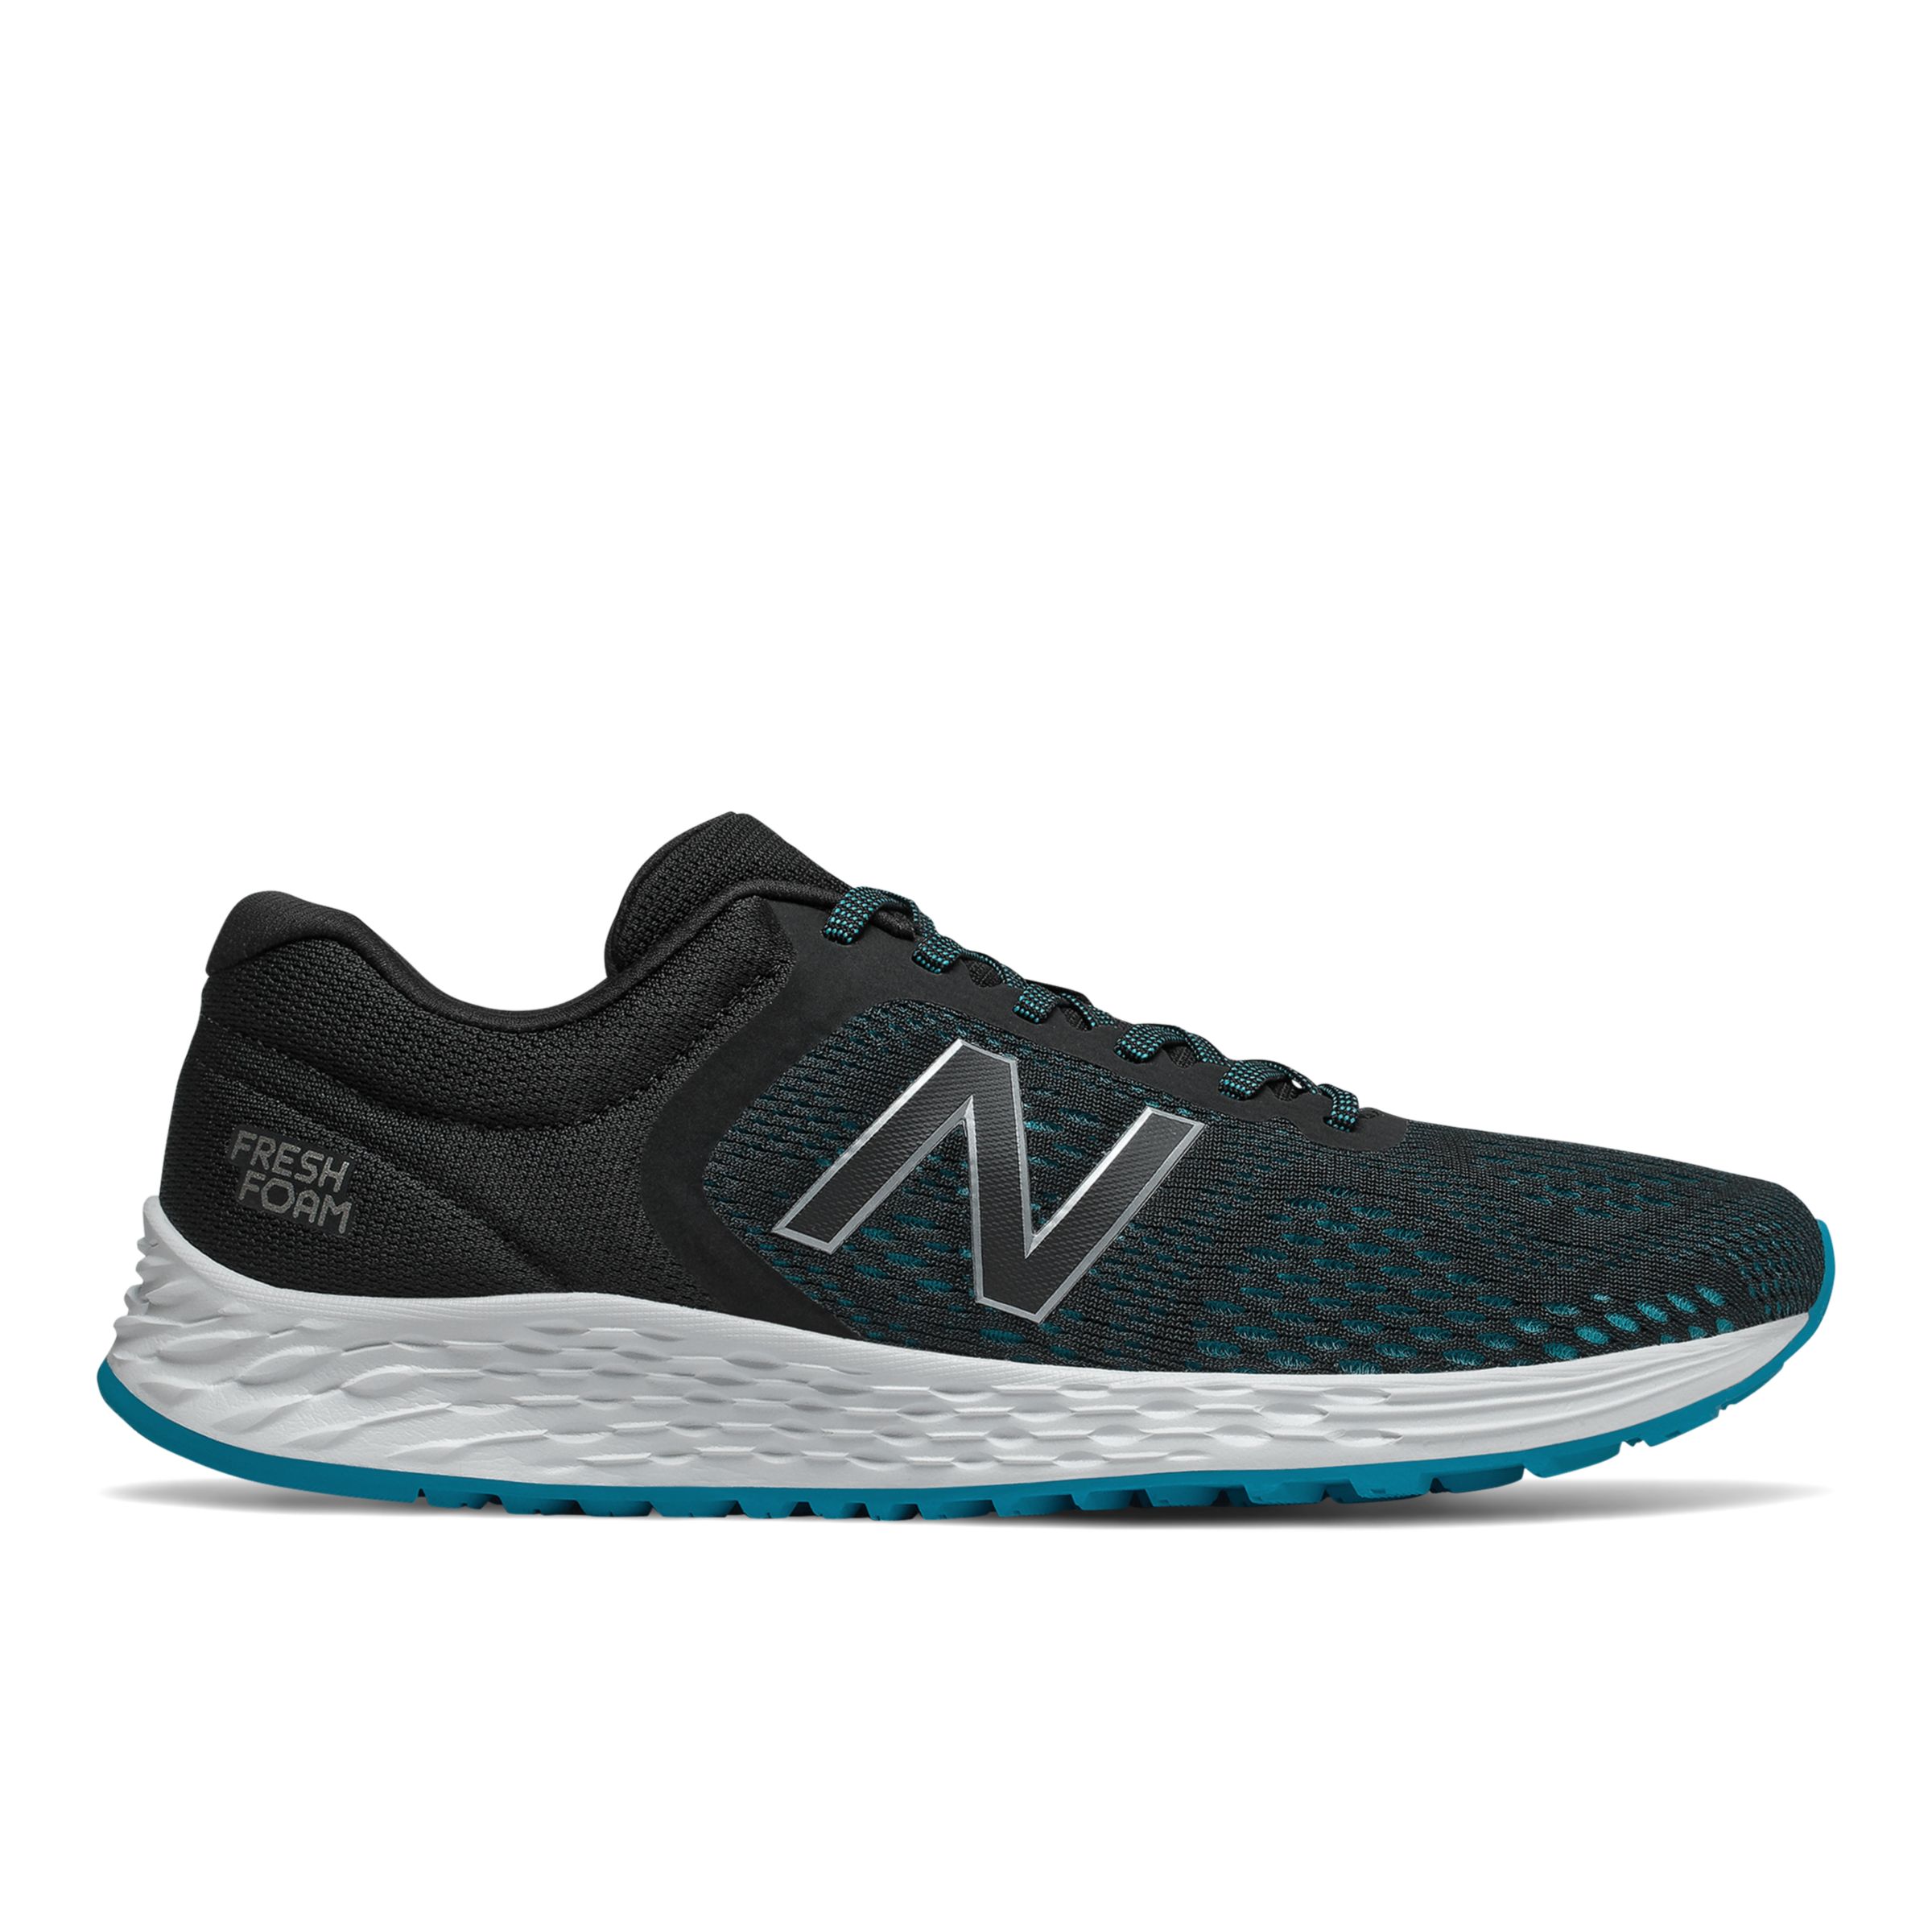 New Balance MARIS-V2 on Sale - Discounts Up to 57% Off on MARISCT2 at Joe's  New Balance Outlet